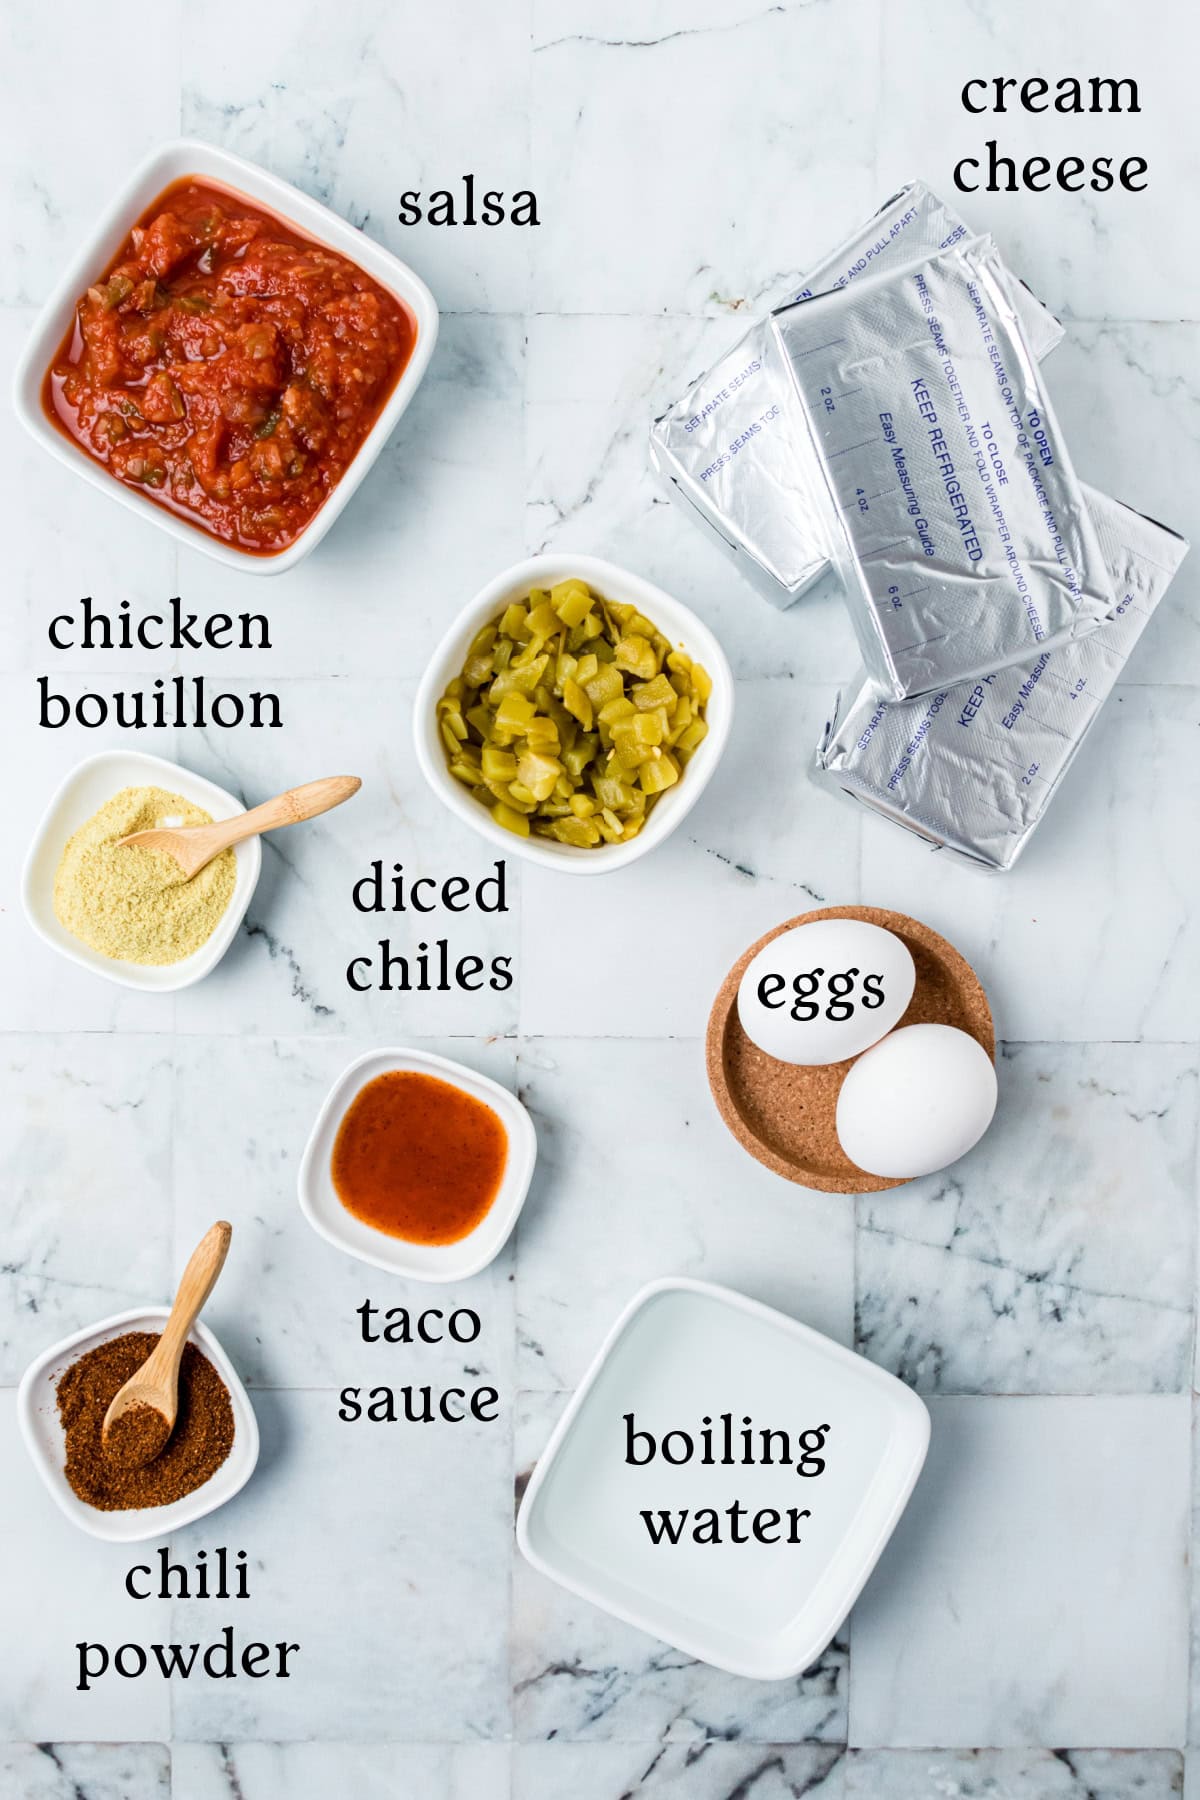 ingredients displayed for making mexican cheesecake dip